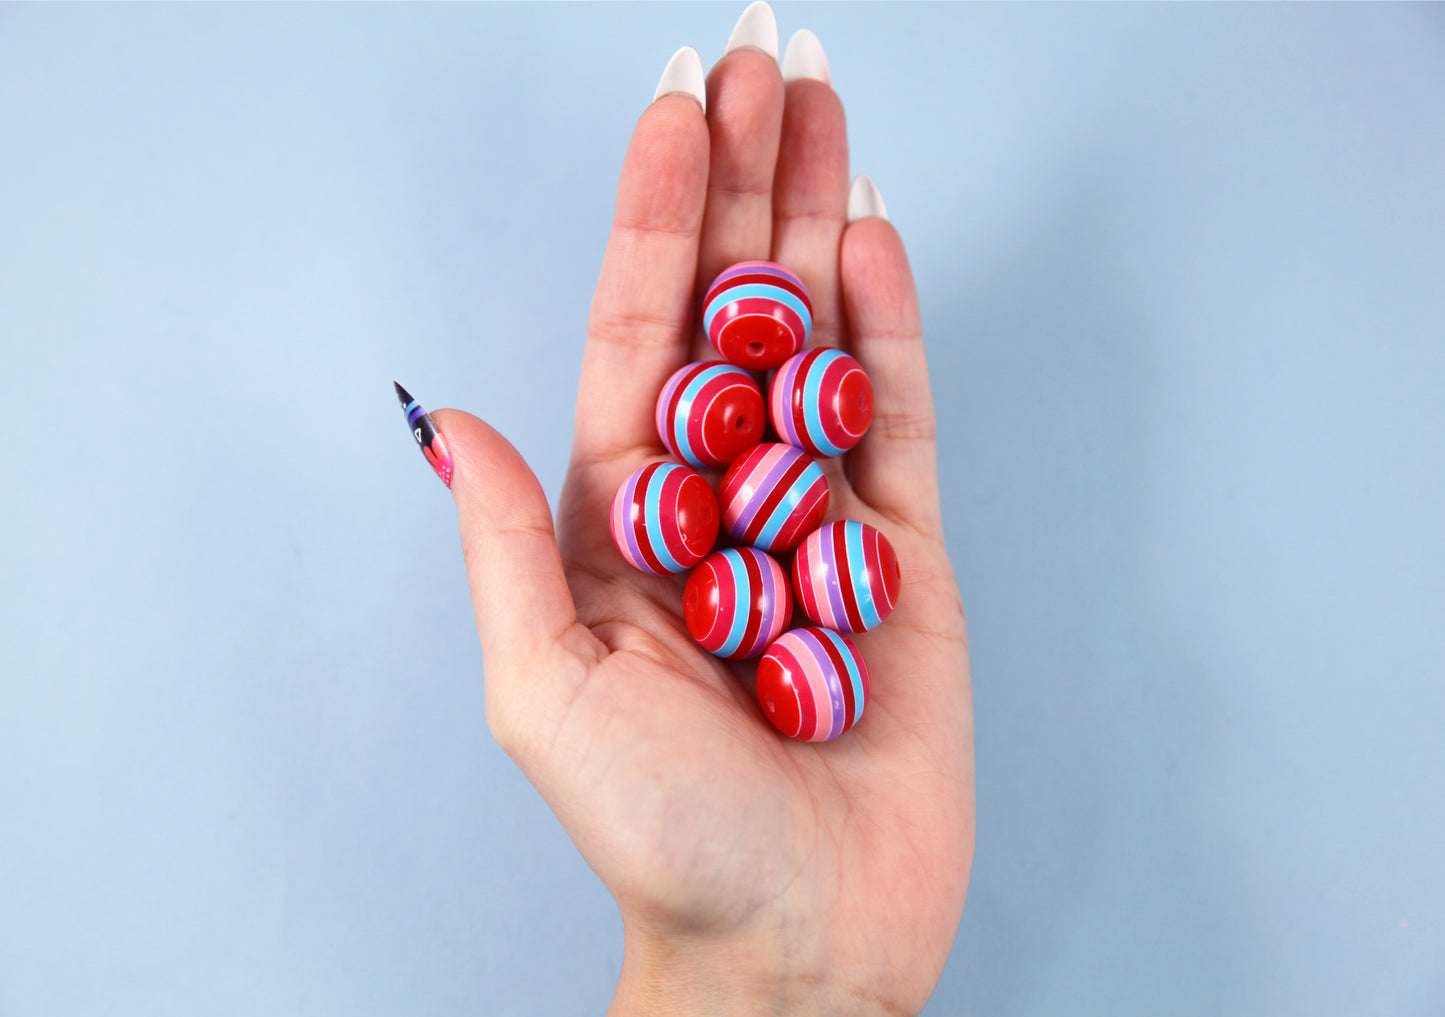 Chunky Striped Beads - 20mm Red Pink Purple Blue Mix Stripes Resin Beads - 12 pc set